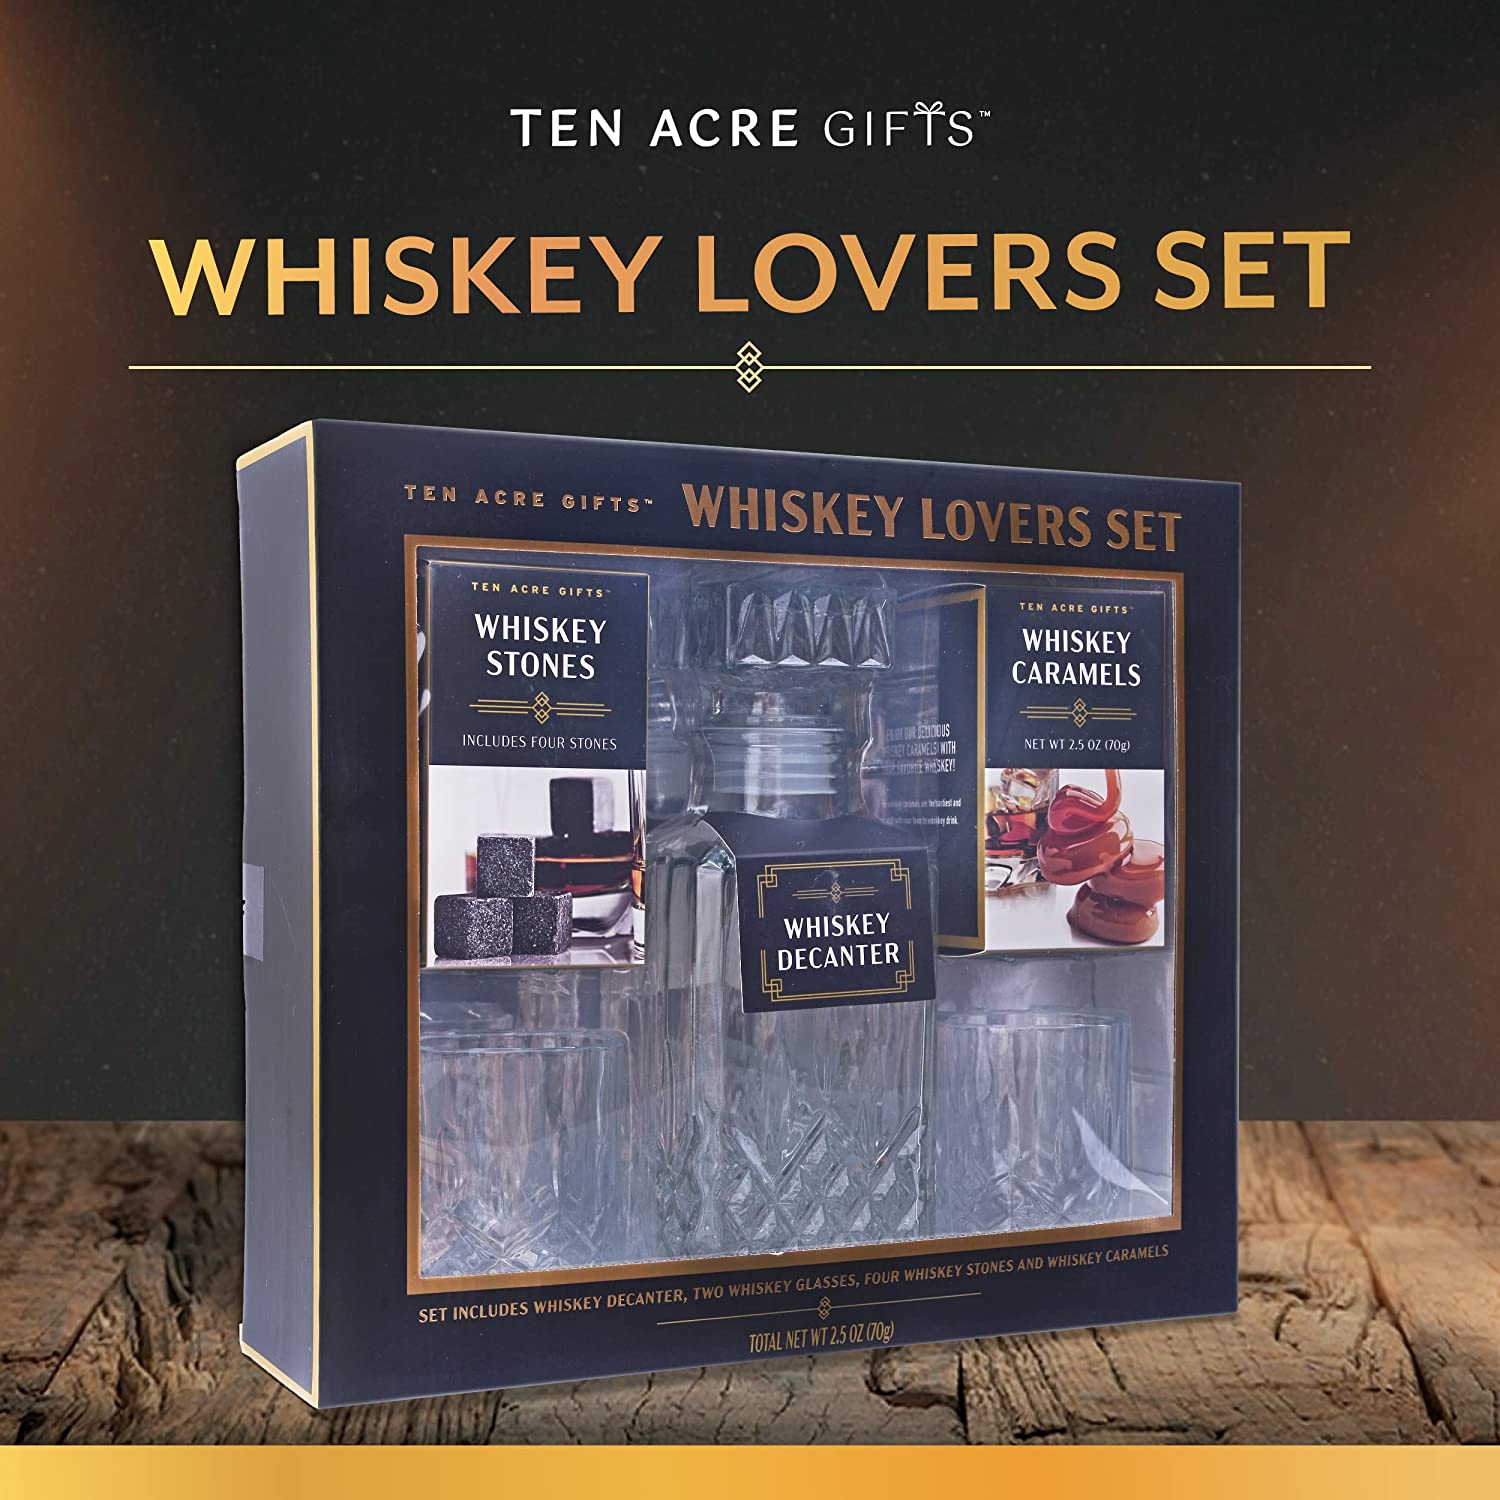 10 Father's Day gifts for whiskey lovers - Reviewed